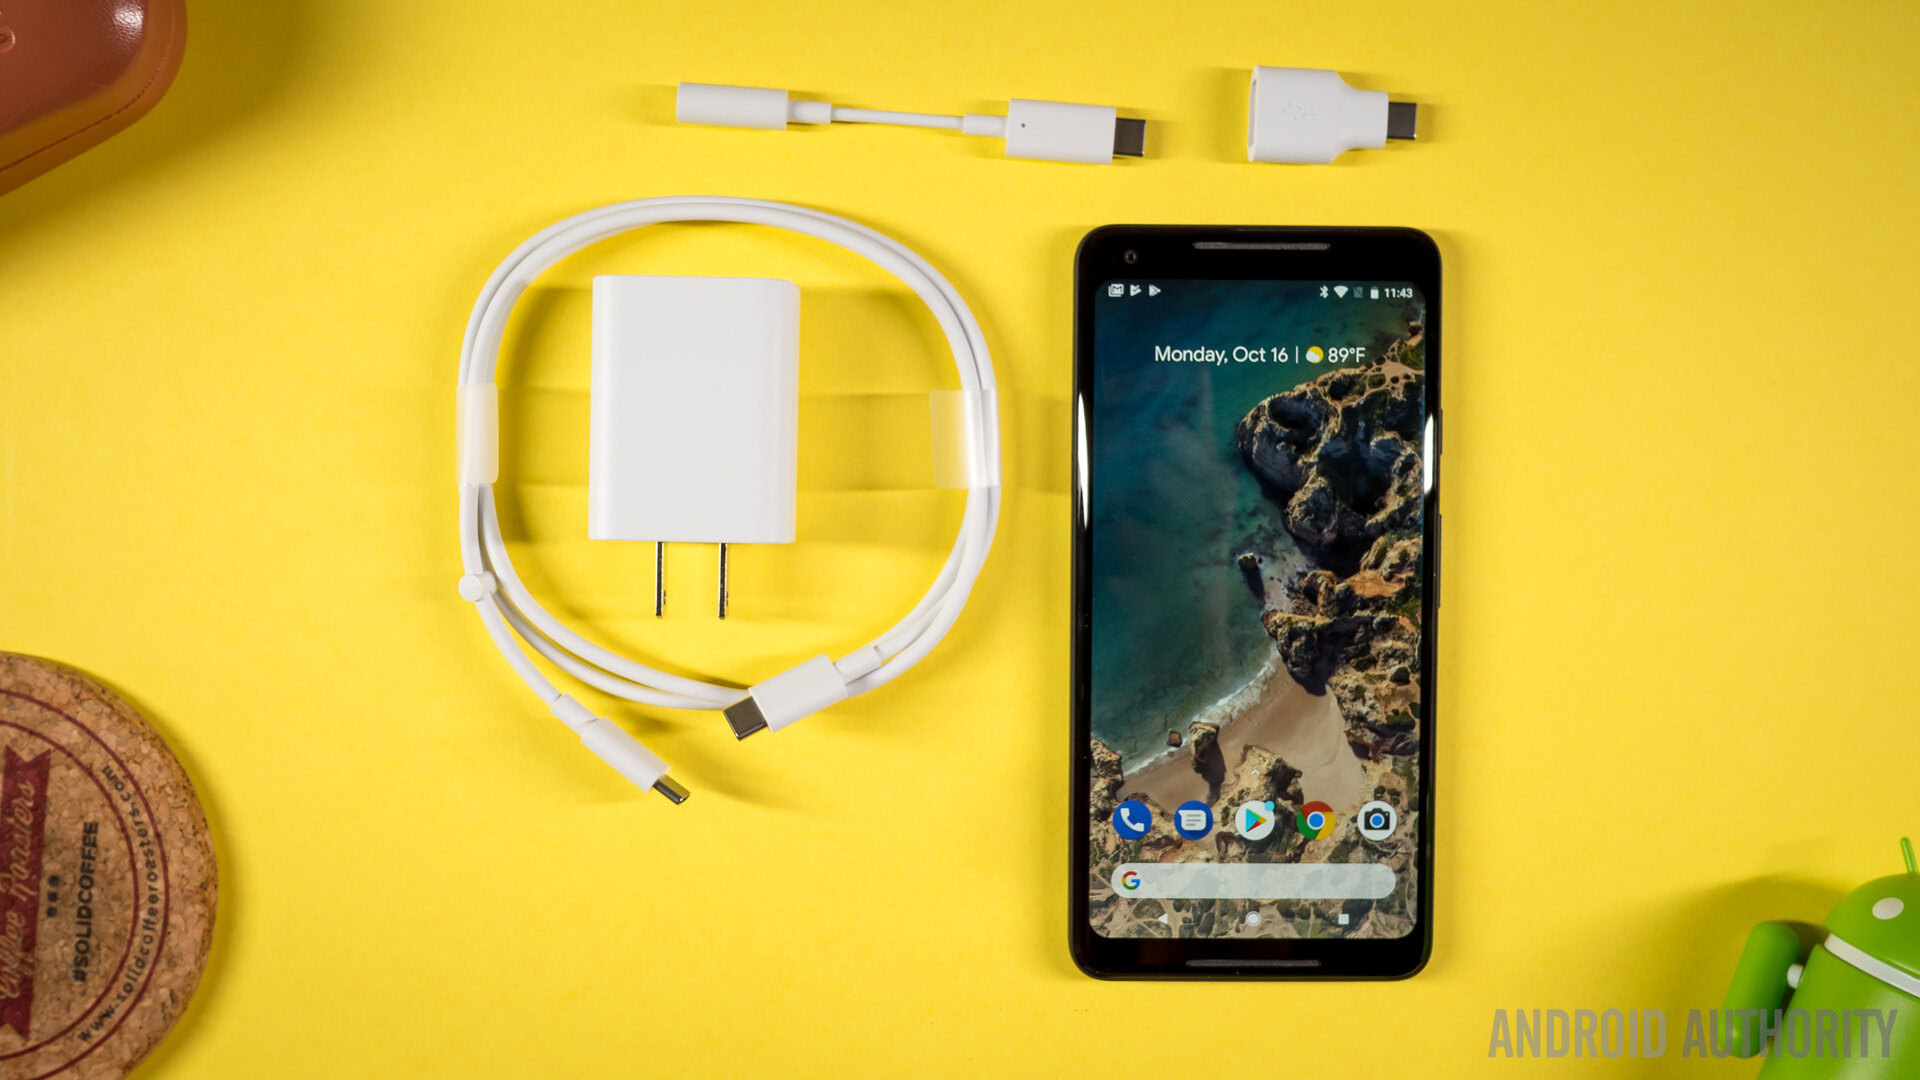 Google Pixel XL 2 Review: An Upgraded Android with a Spectacular